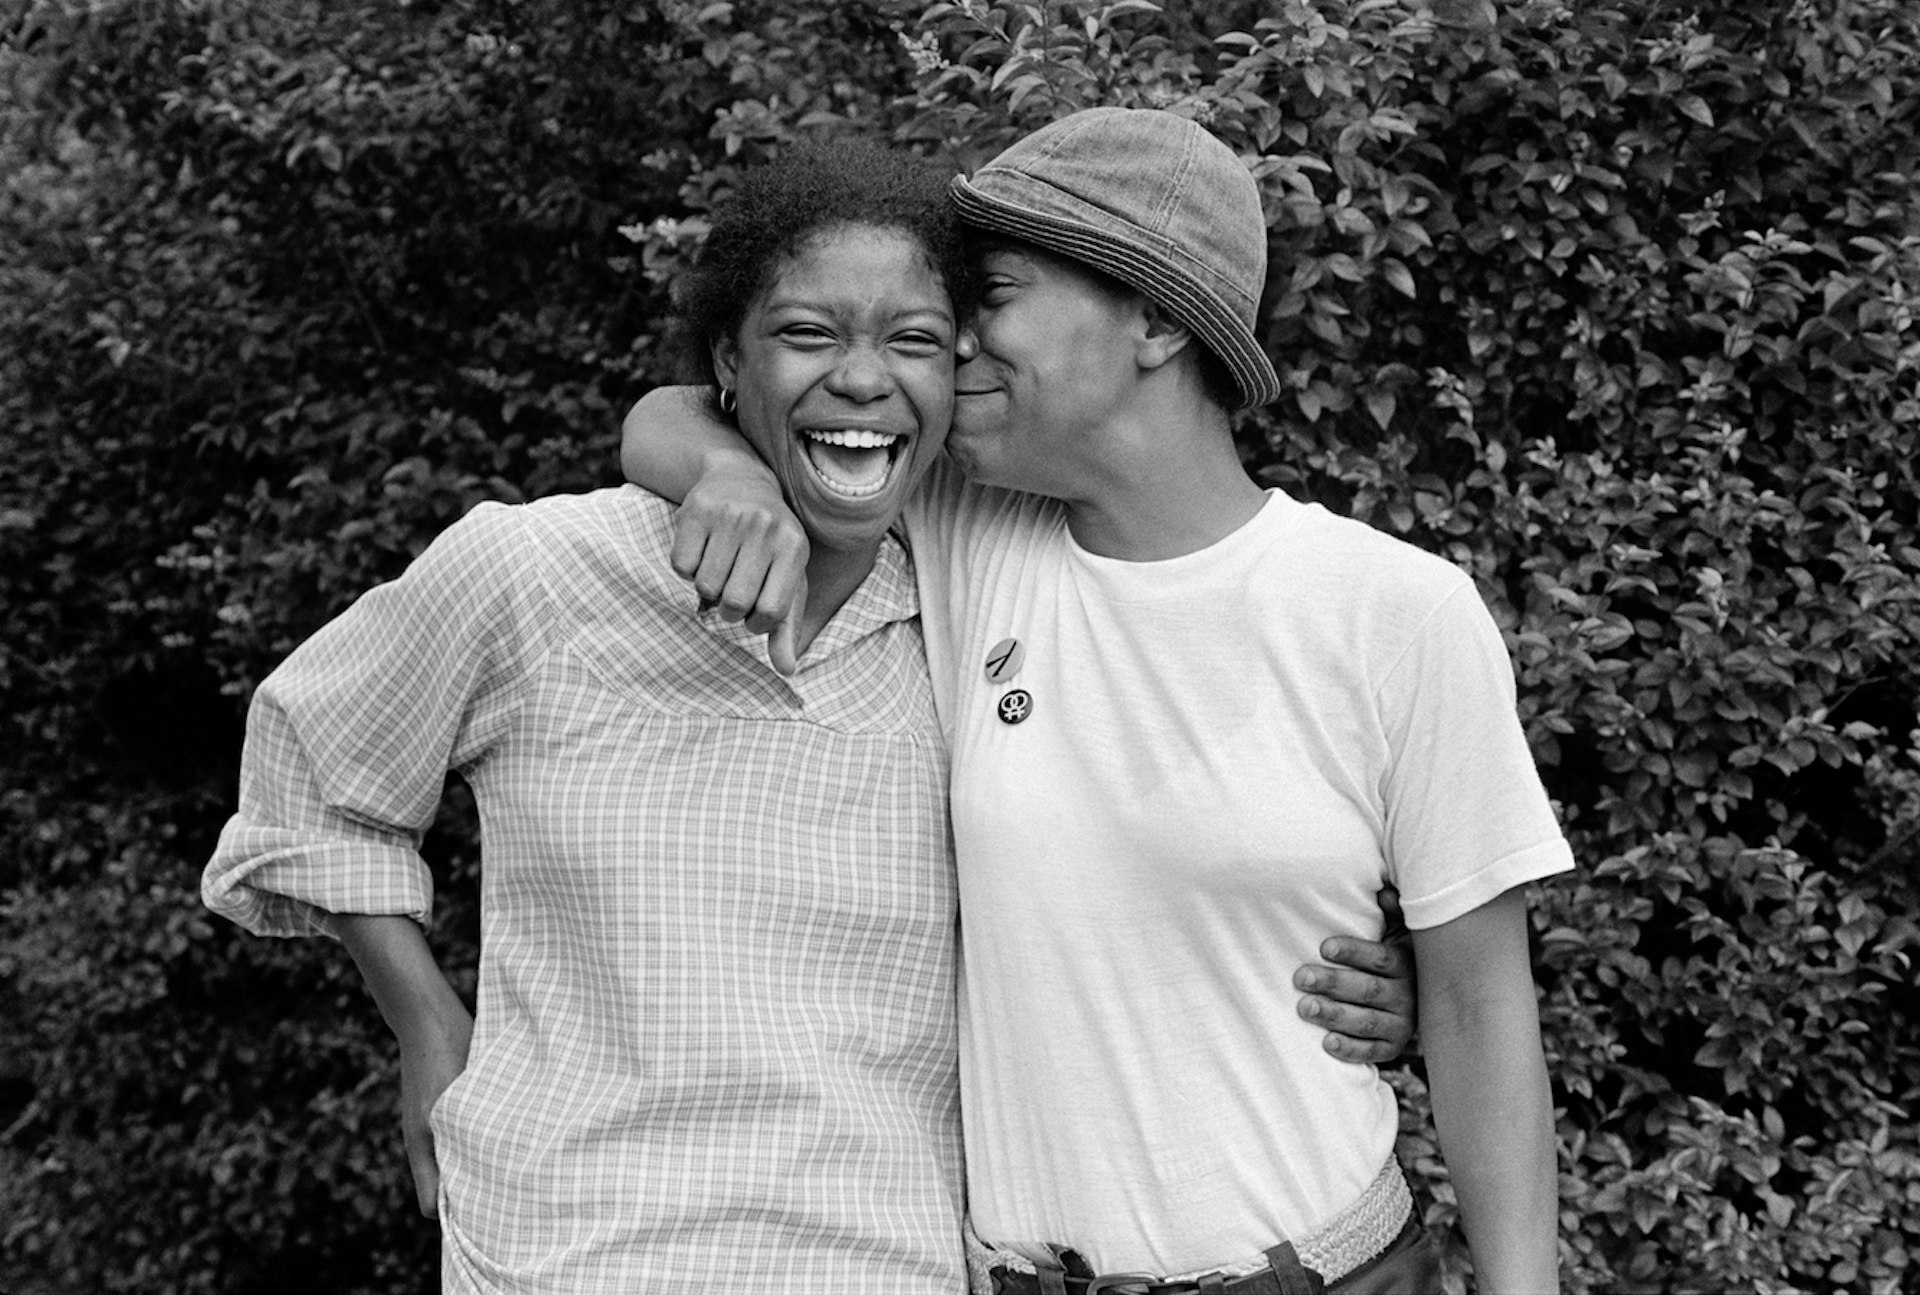 A groundbreaking document of lesbian life in the ‘70s